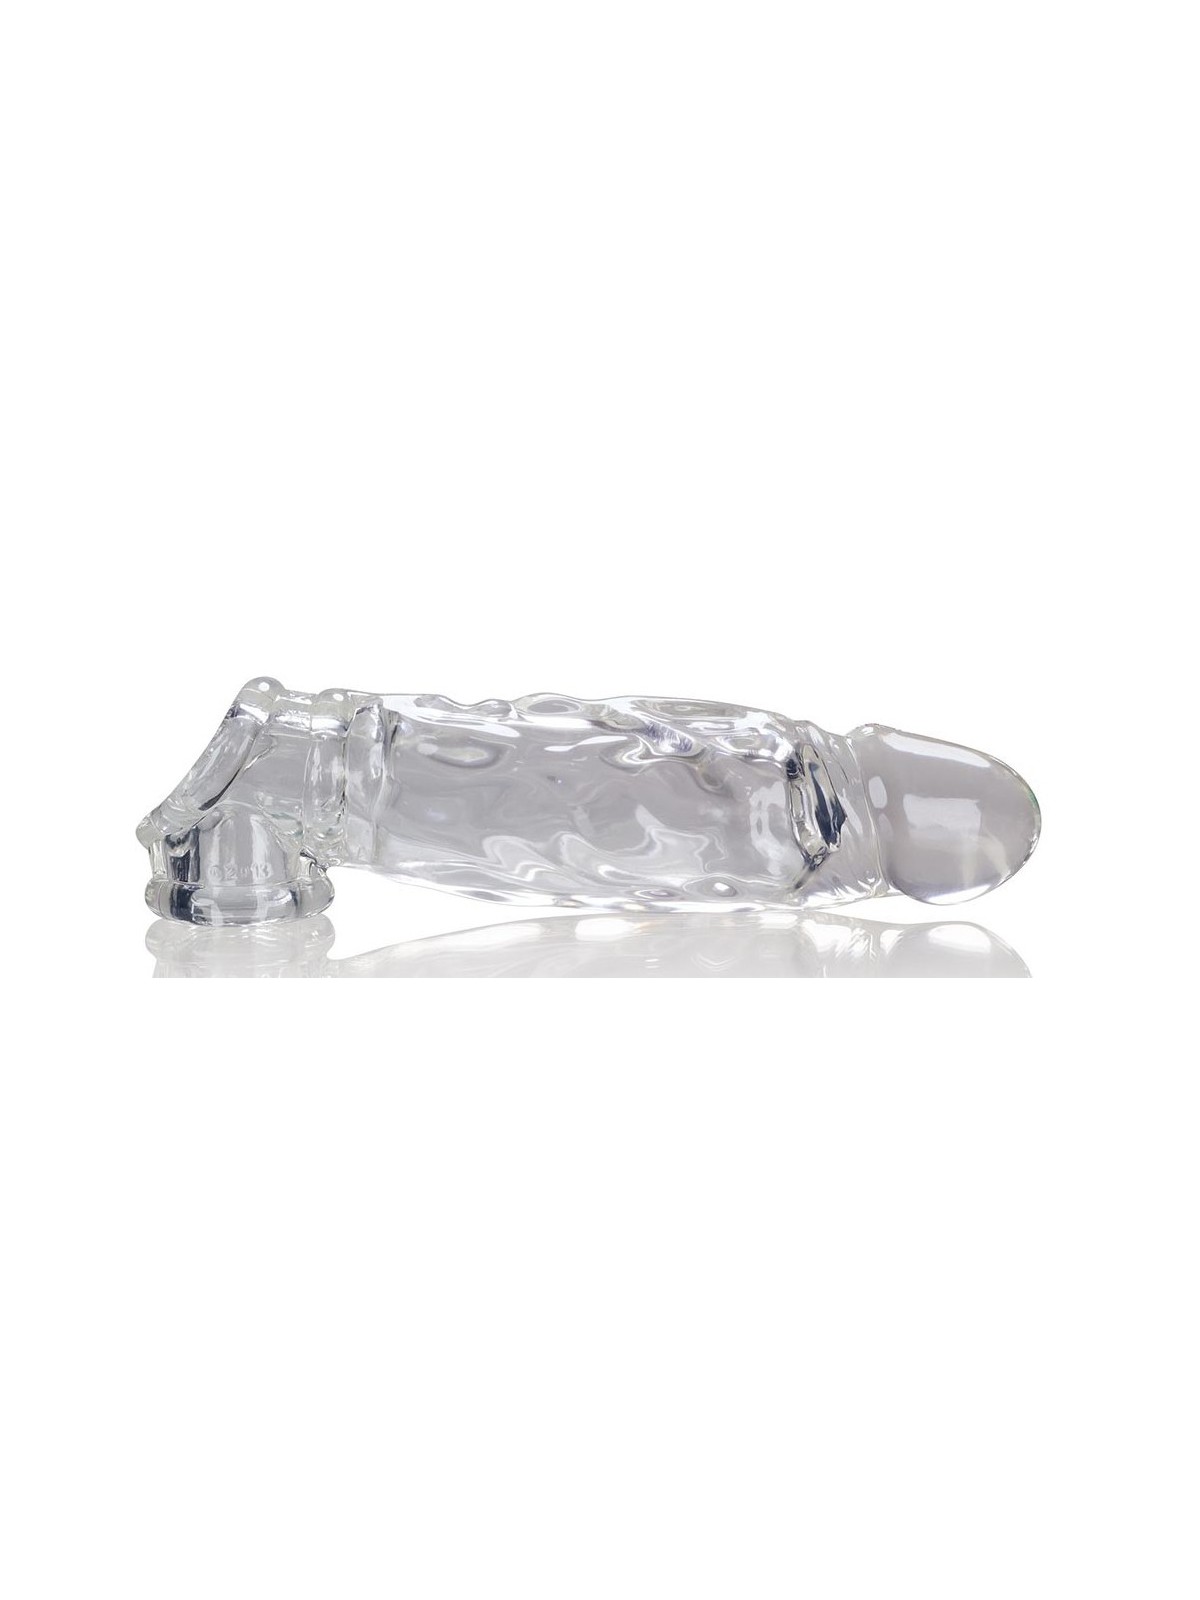 Penis extension Butch penis sheath 20 x 5.5cm Transparent It is made of flexible TPR 128,96 €